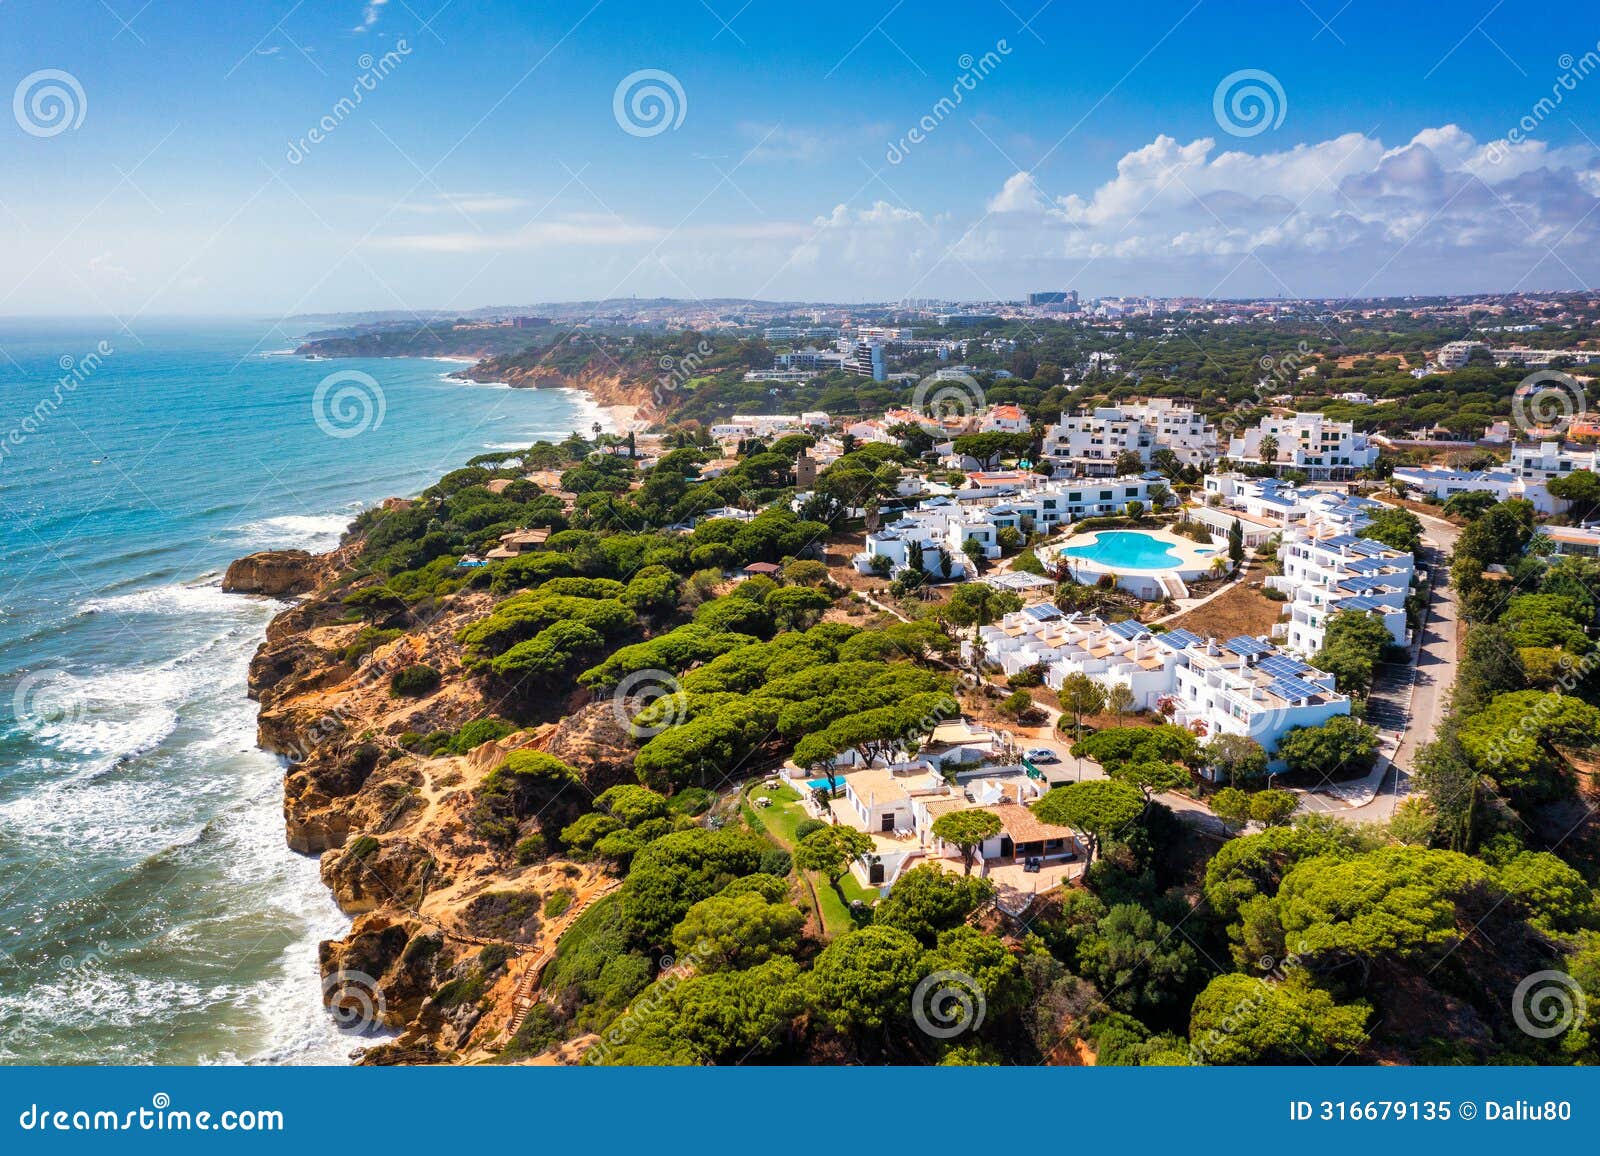 amazing view from the sky of town olhos de agua in albufeira, algarve, portugal. aerial coastal view of town olhos de agua,